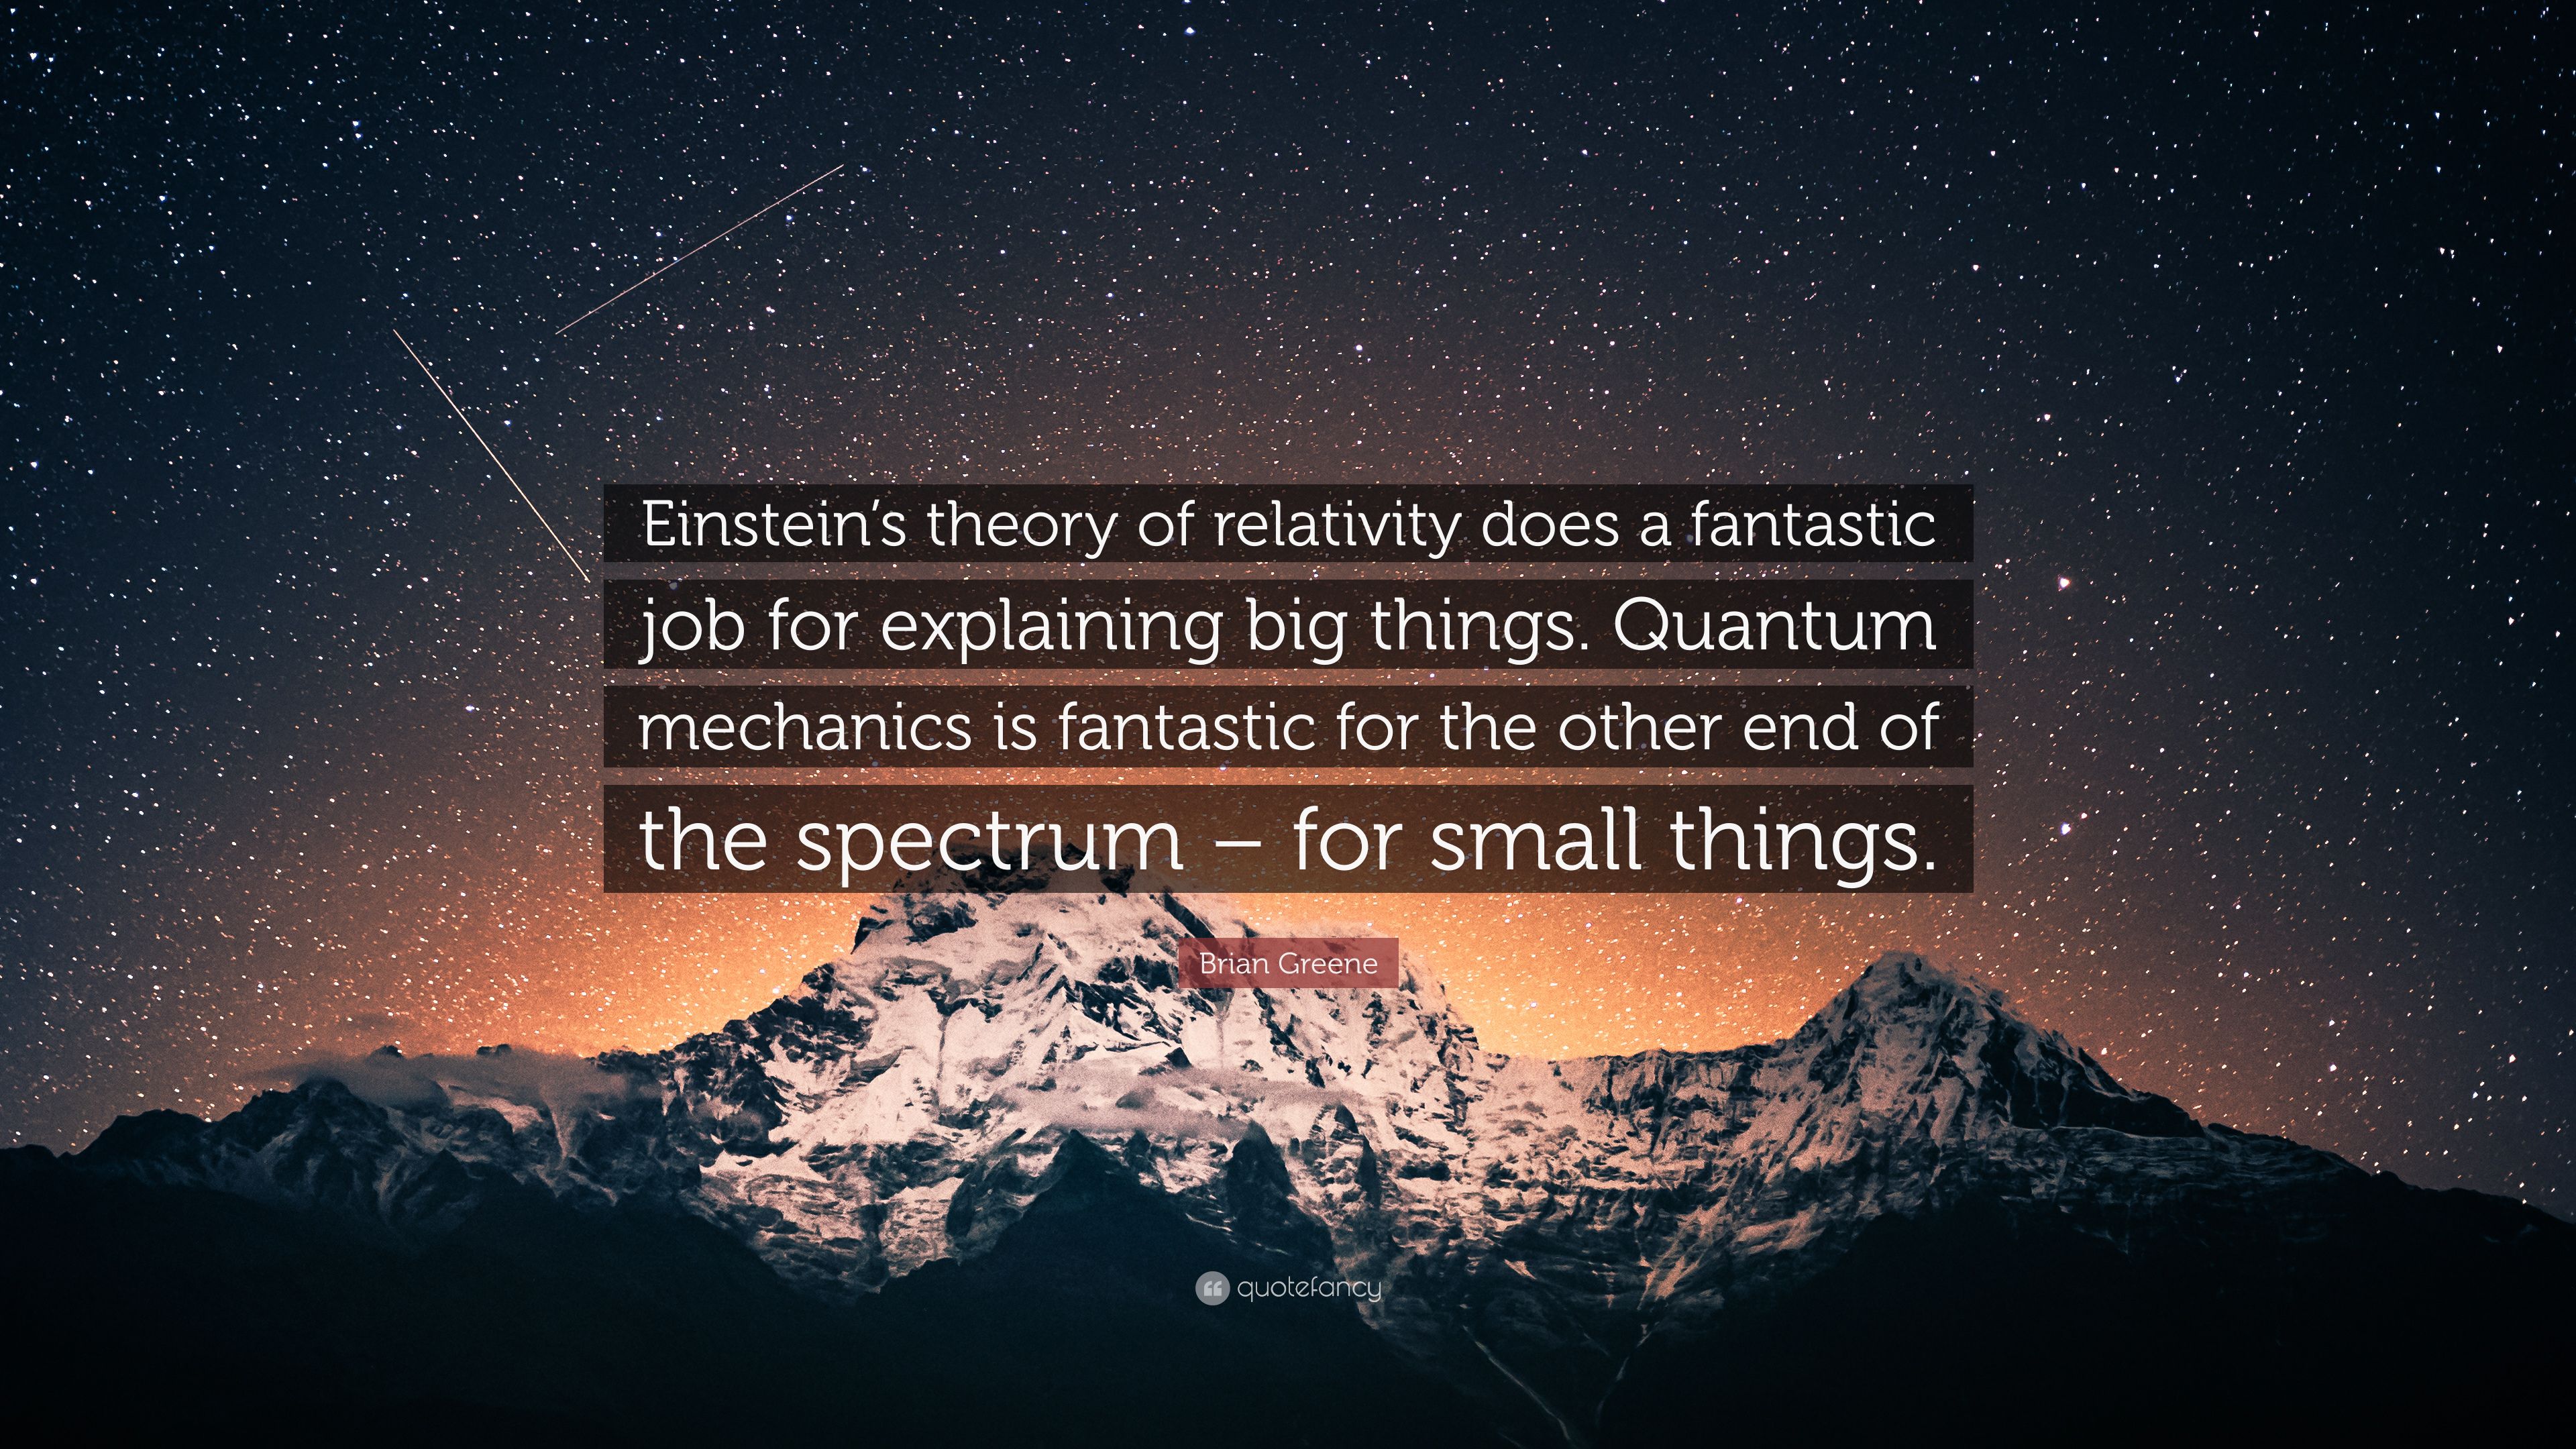 Brian Greene Quote: “Einstein's theory of relativity does a